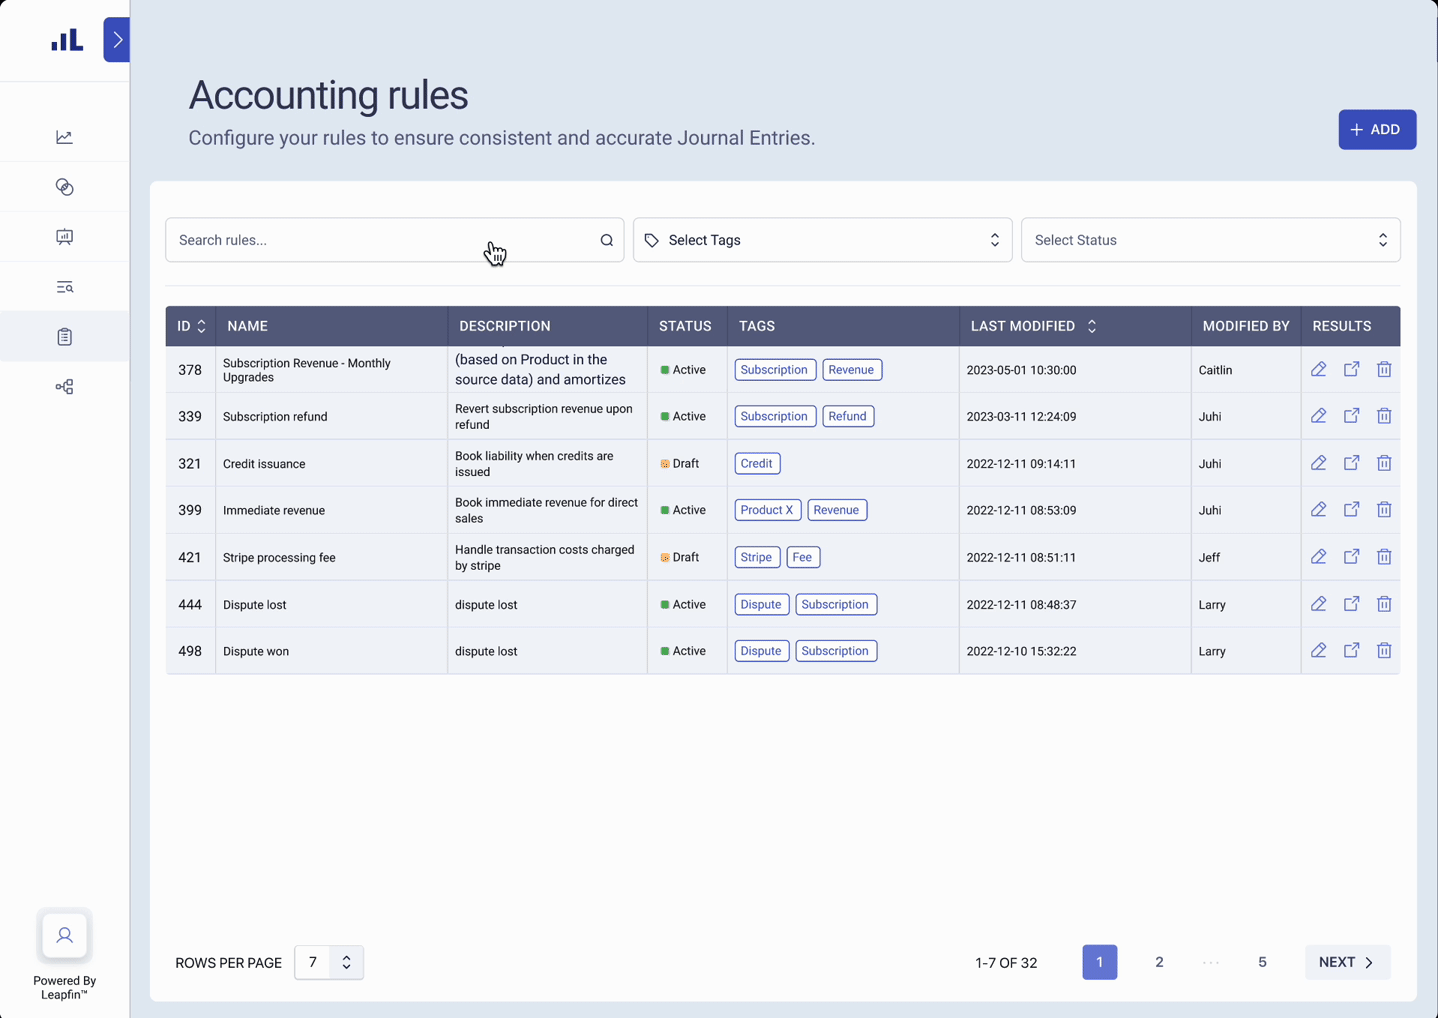 bl-newfeature_3-accountingrules